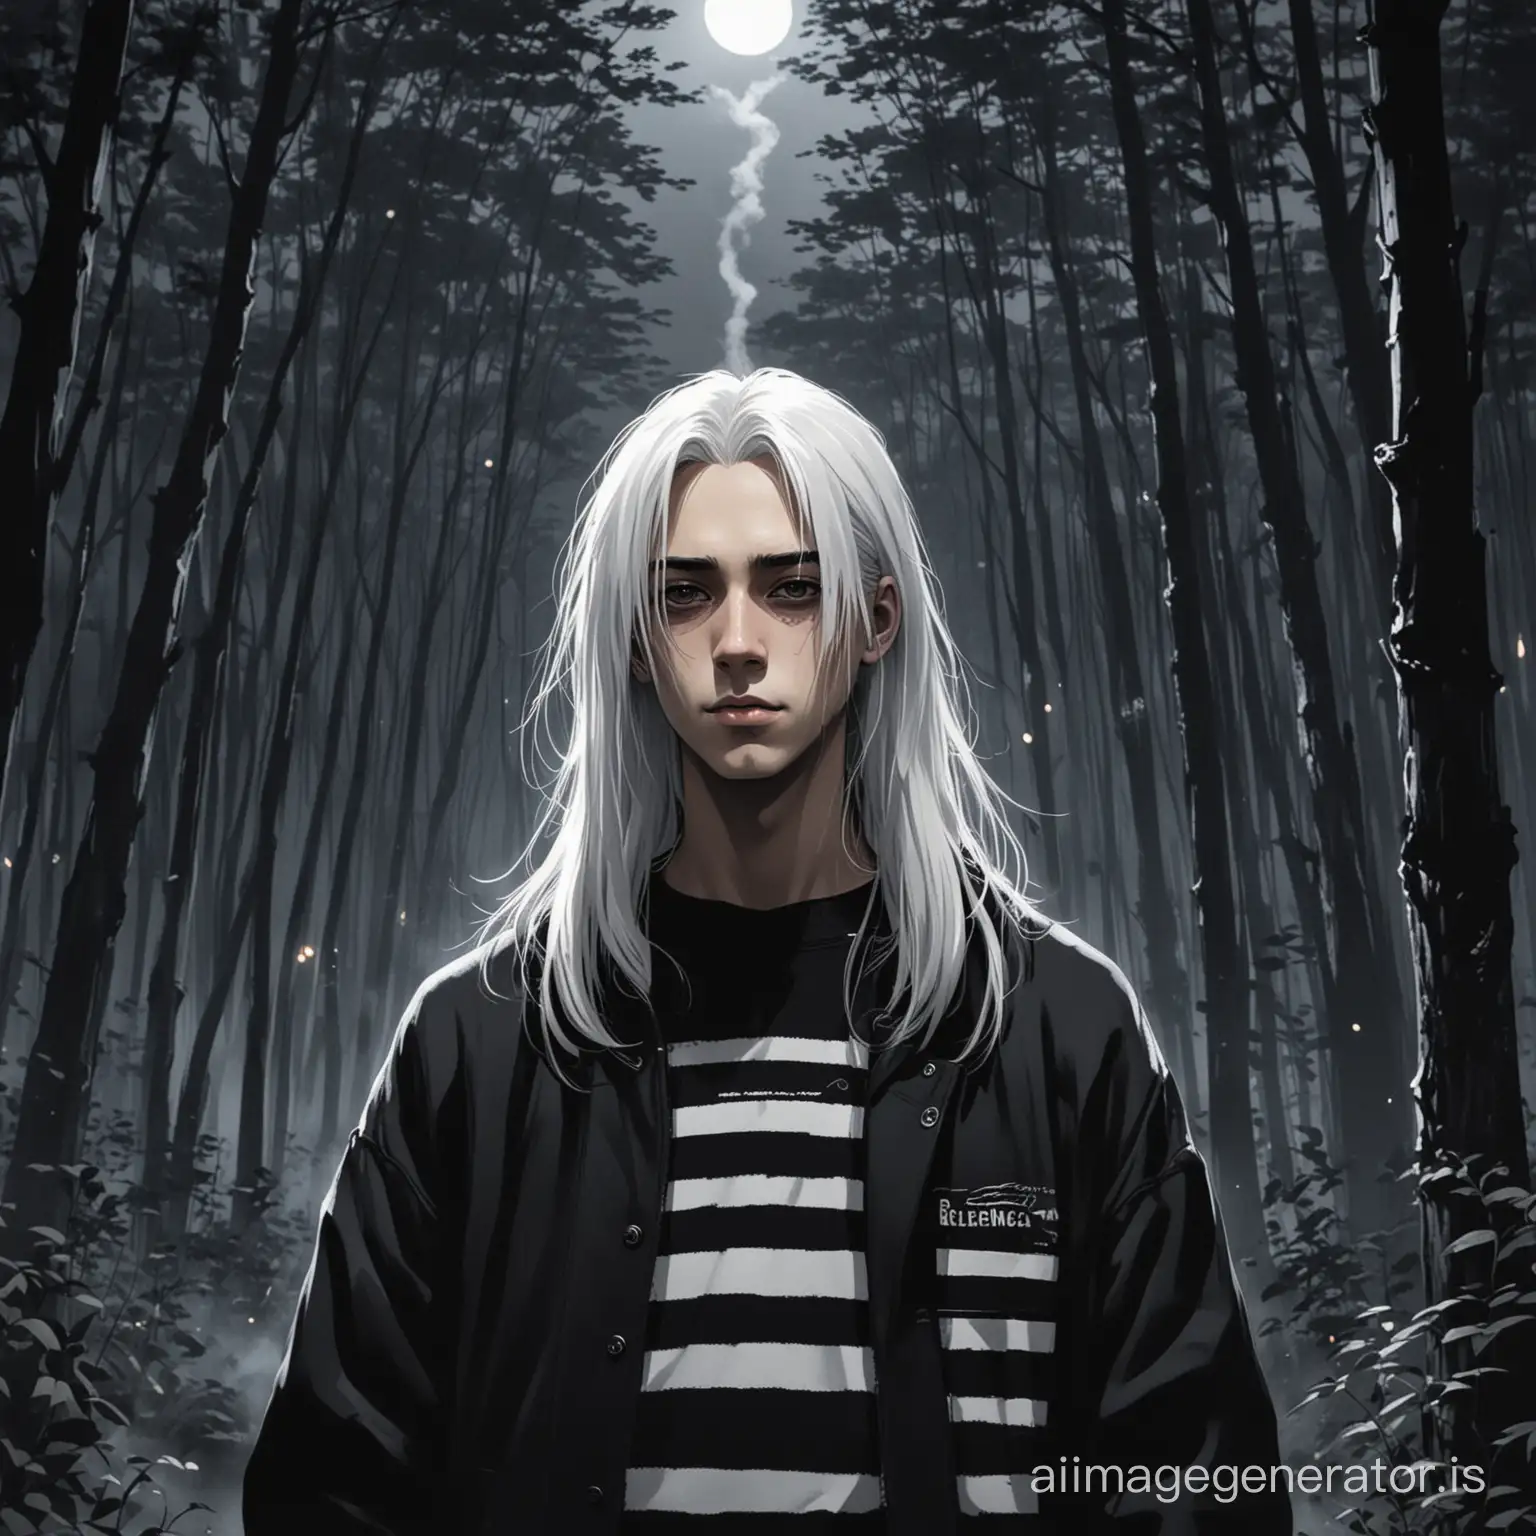 LongHaired-Young-Man-in-Striped-Sweater-Smoking-in-a-Horror-Anime-Forest